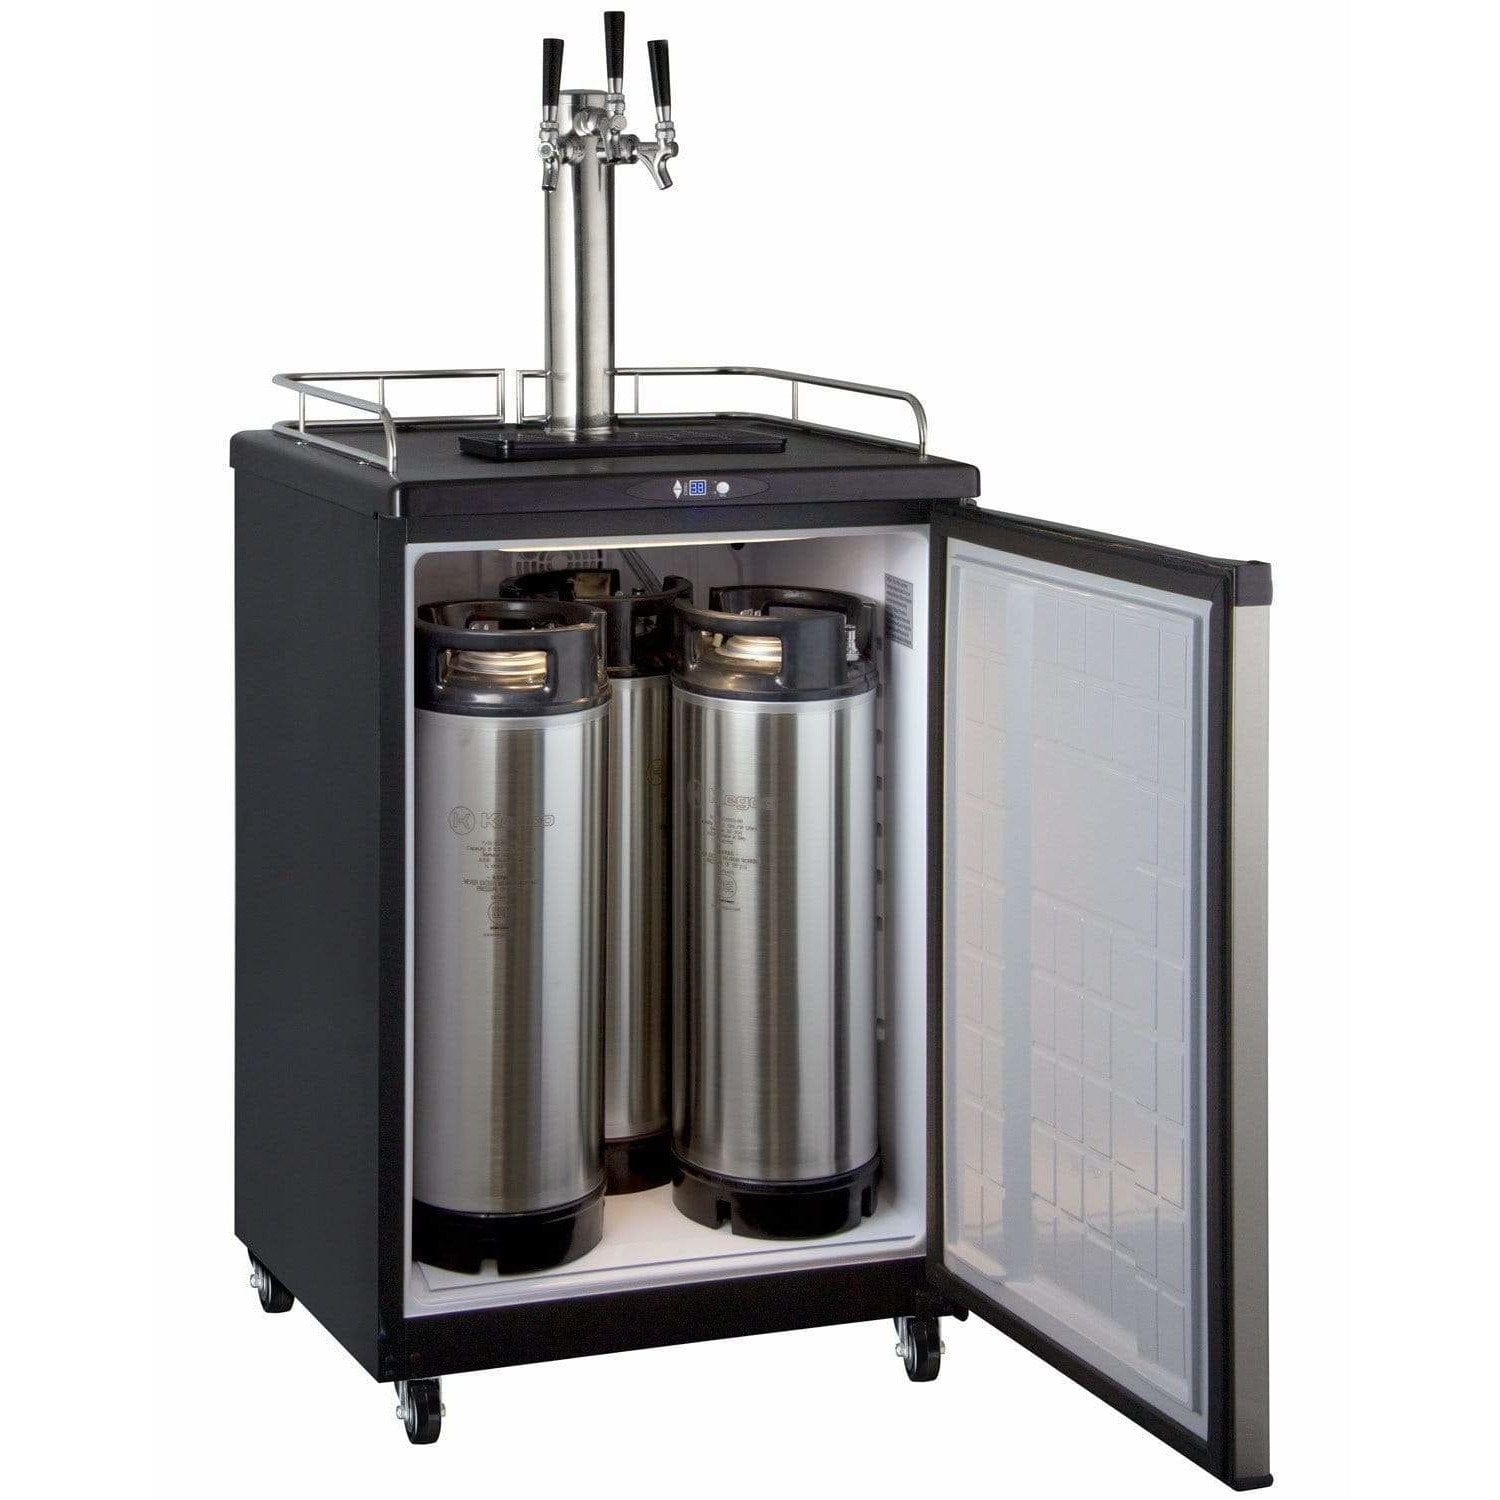 Kegco 24" Wide Triple Tap Stainless Steel Home Brew Kegerator HBK163S-3 Wine Coolers Empire